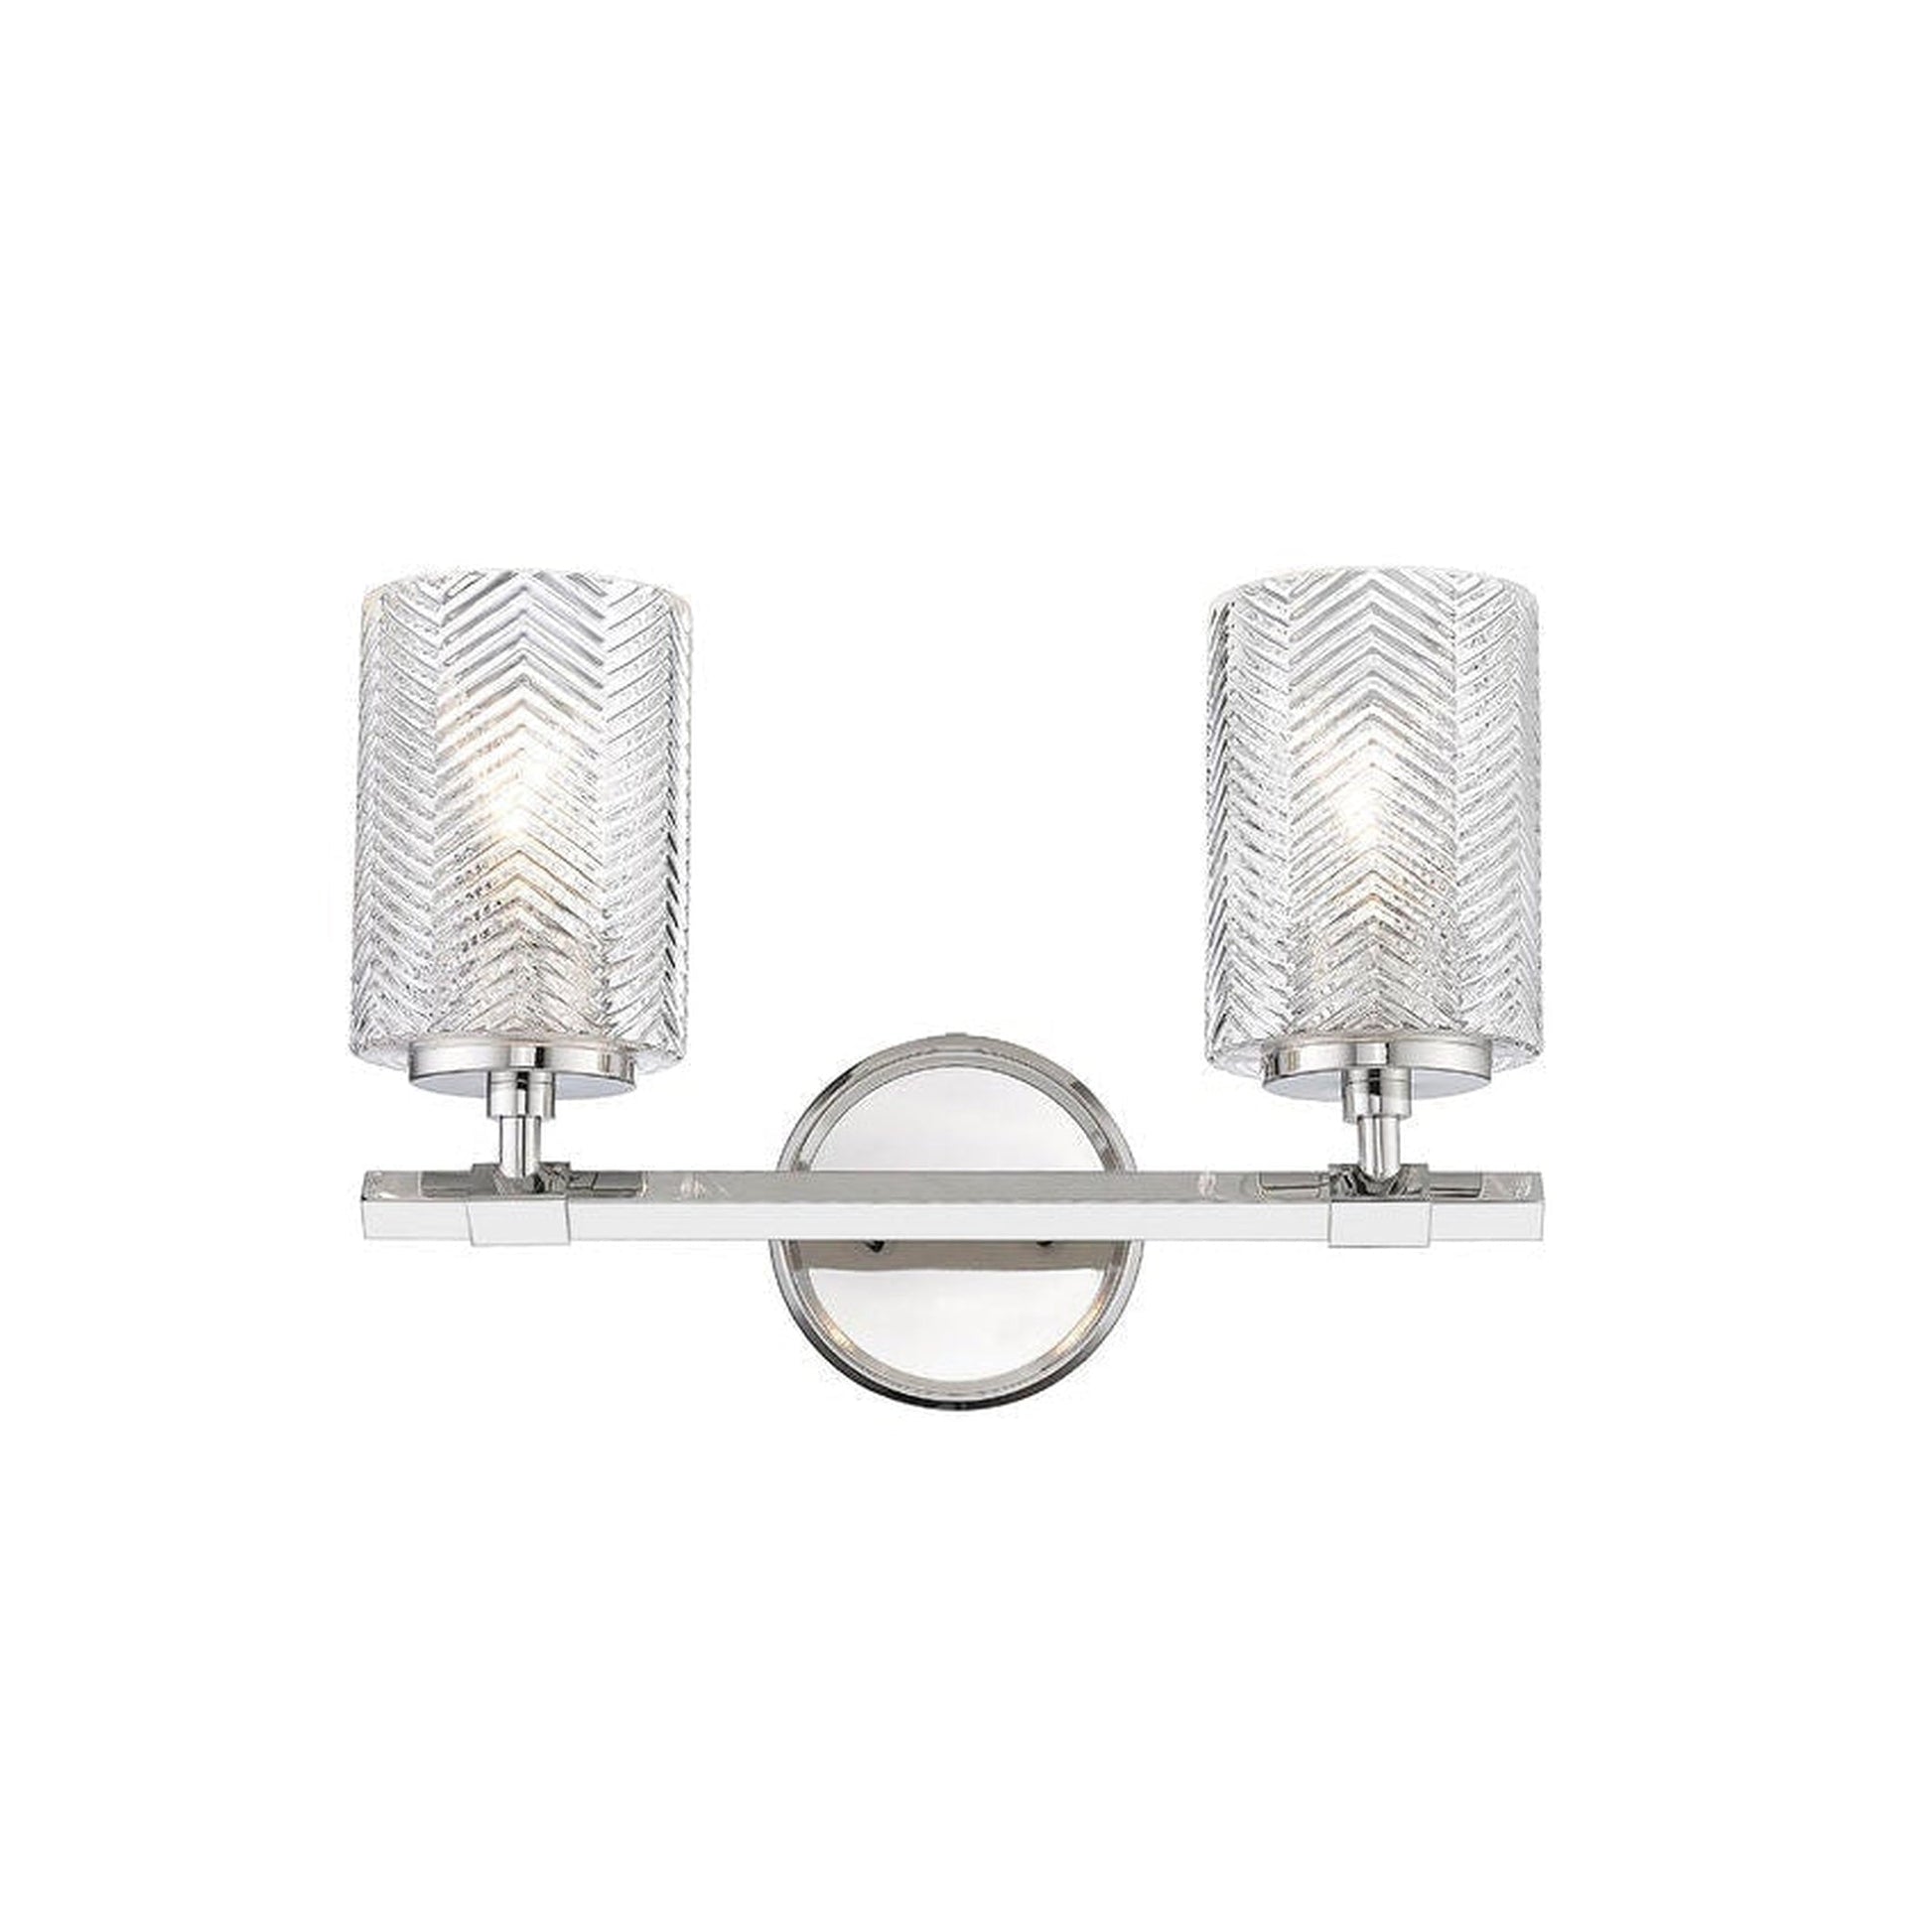 Z-Lite Dover Street 14" 2-Light Polished Nickel Vanity Light With Clear Glass Shade